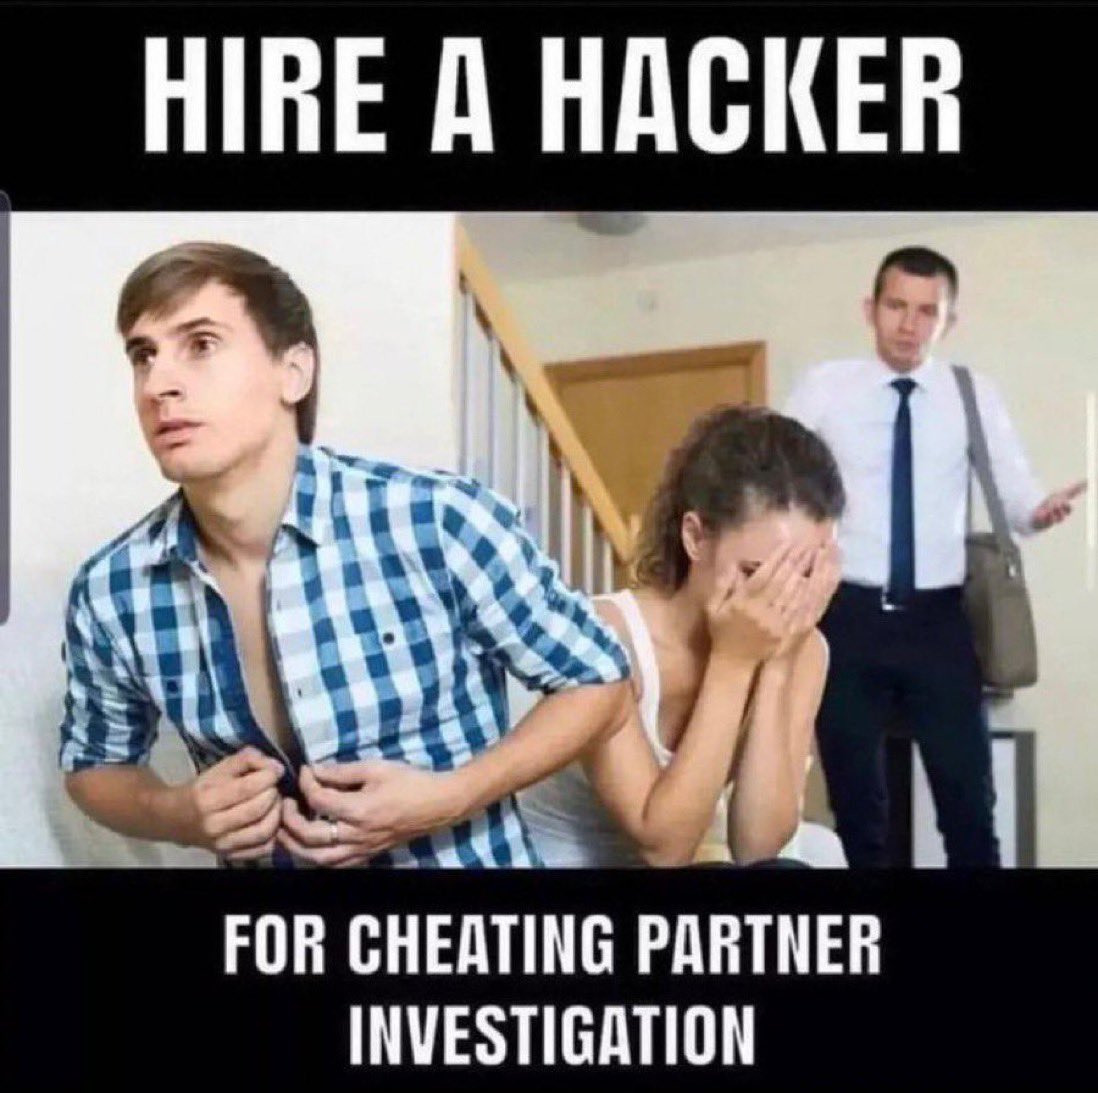 Catch your cheating spouse #cheat #betrayal #unfaithful #WorldCup2022
#100DaysOfCode #Spying #investigating #javascript #housewifeday #cheating #cheatingwife #cheatingboyfriend #cheatingpartner #cheatinghousewife #cheatingmen